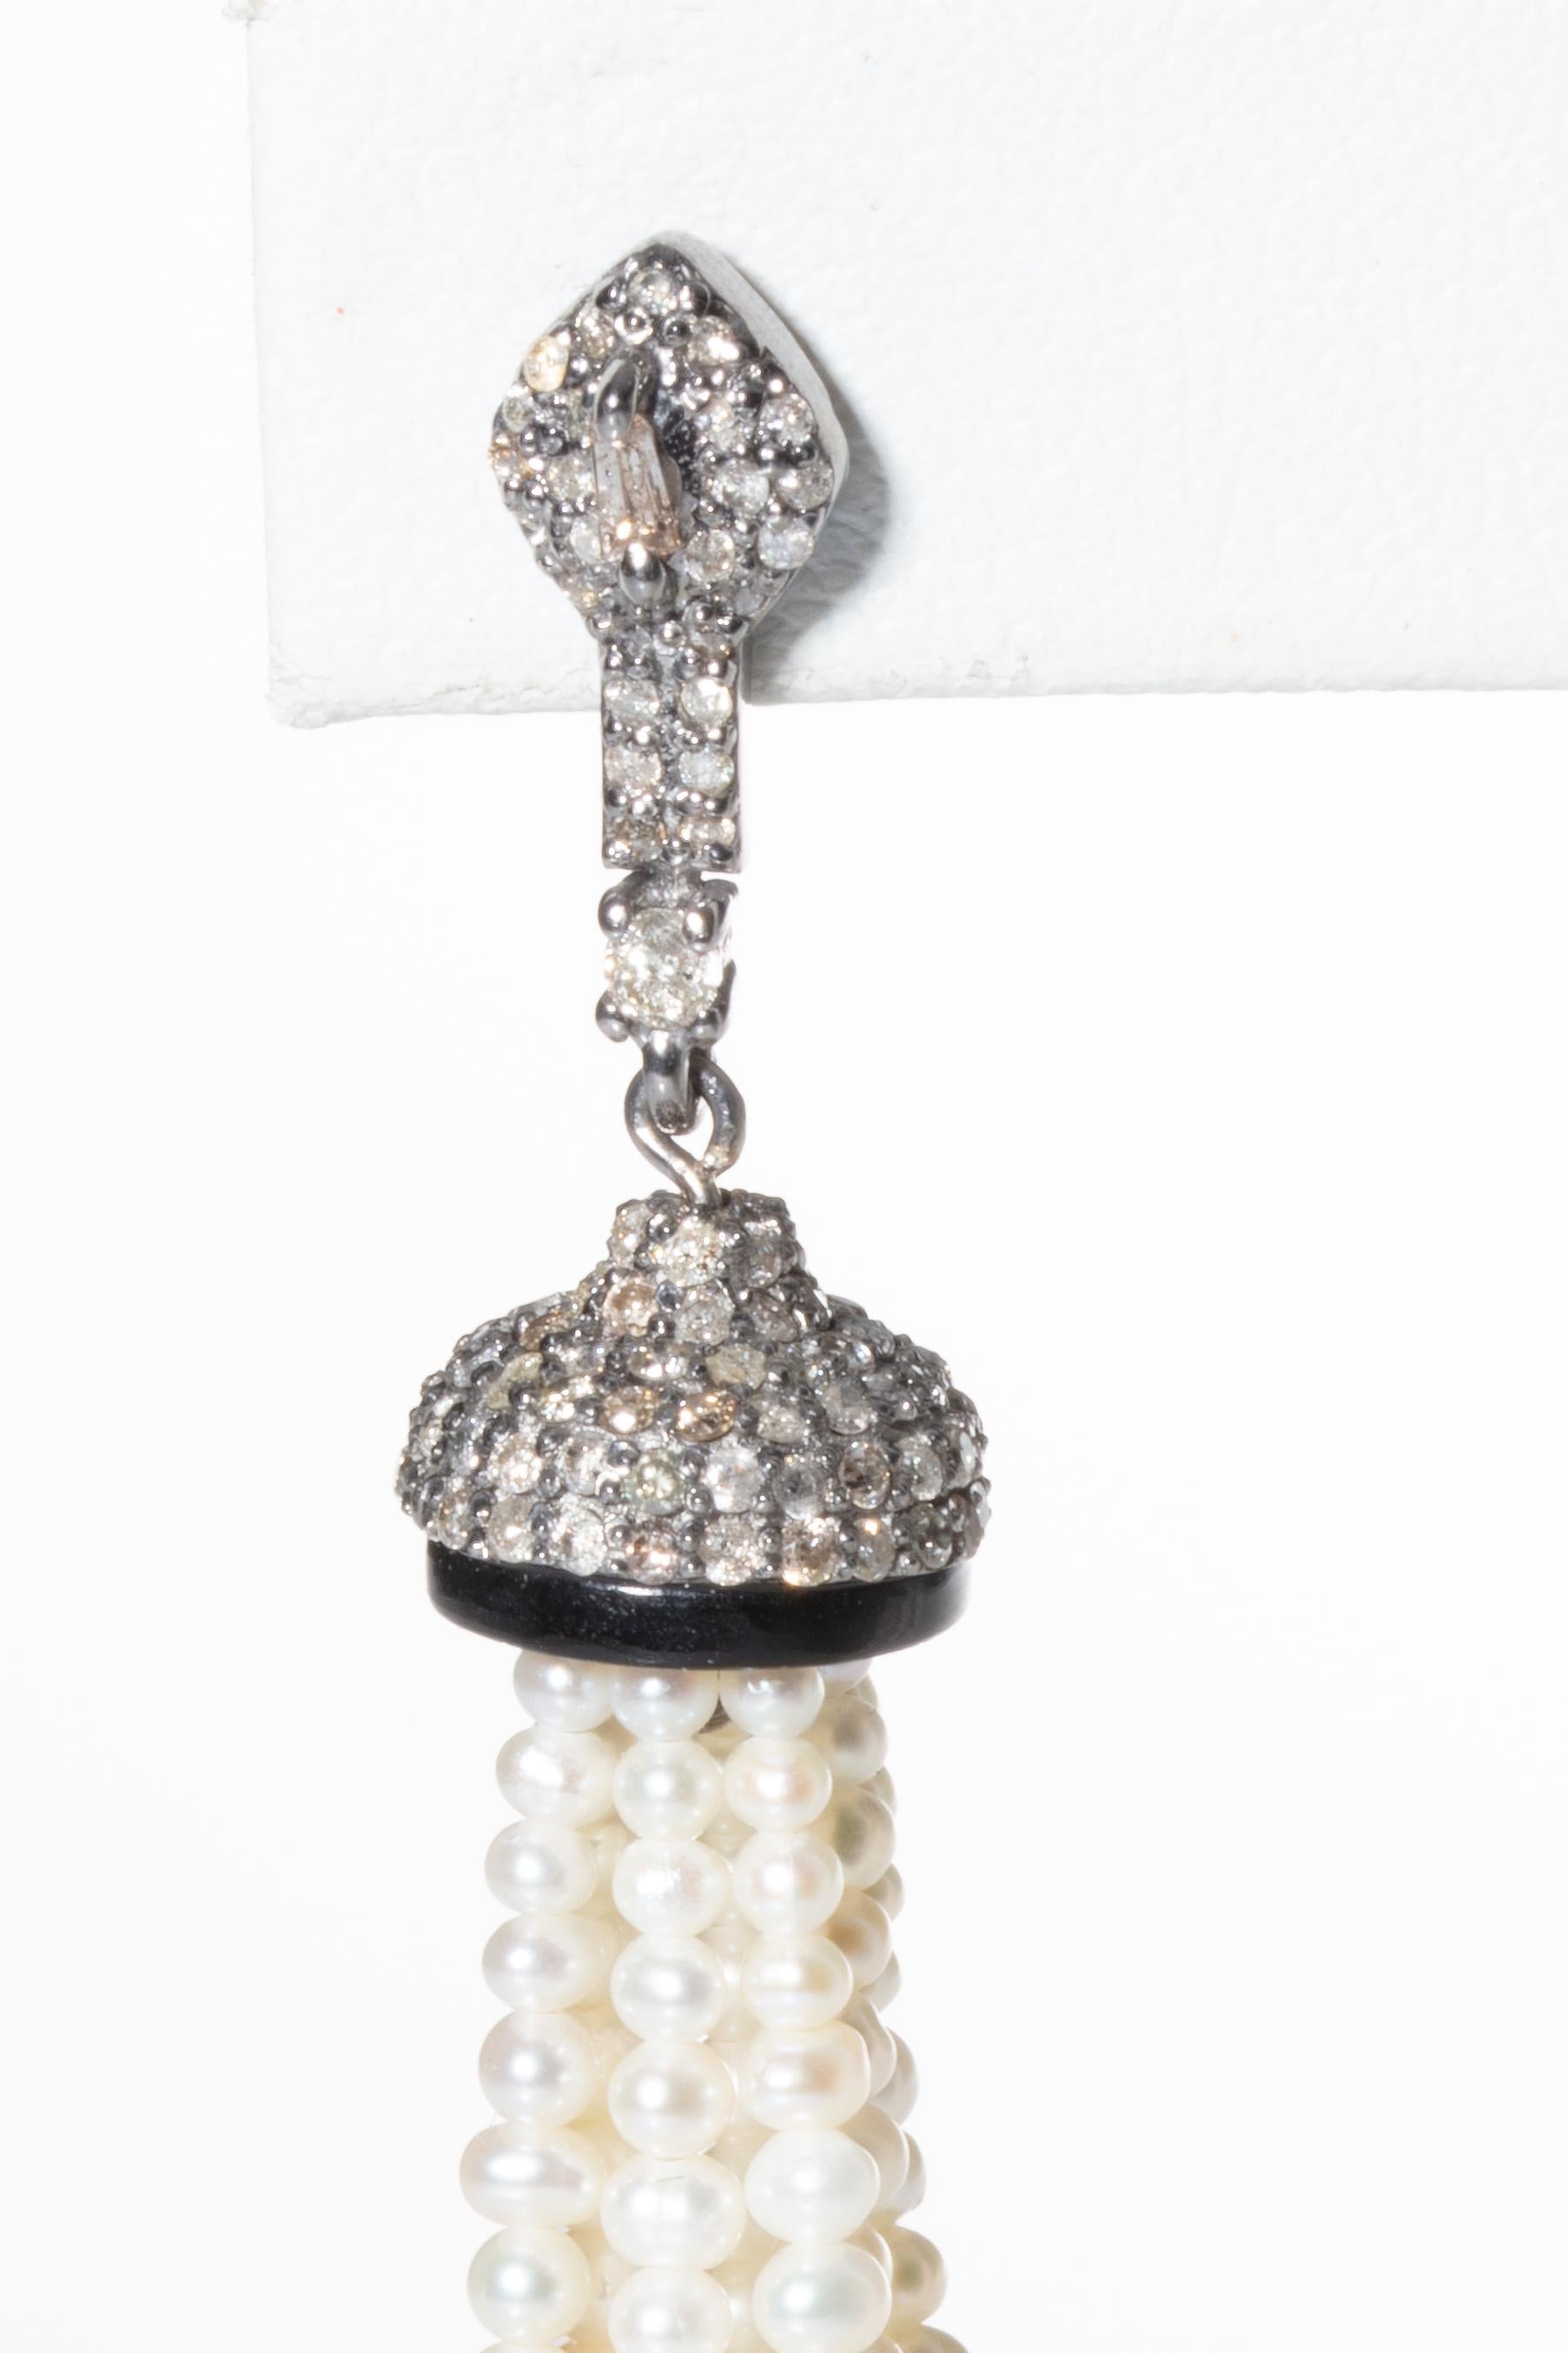 Lovely graduated cultured pearl tassel earrings with a pave` diamond and black onyx end cap.  Post is also pave` diamonds with a diamond baguette at the center.  18K Gold.  Diamonds are 2.61 carats, black onyx is 2.60 carats and the pearls are a